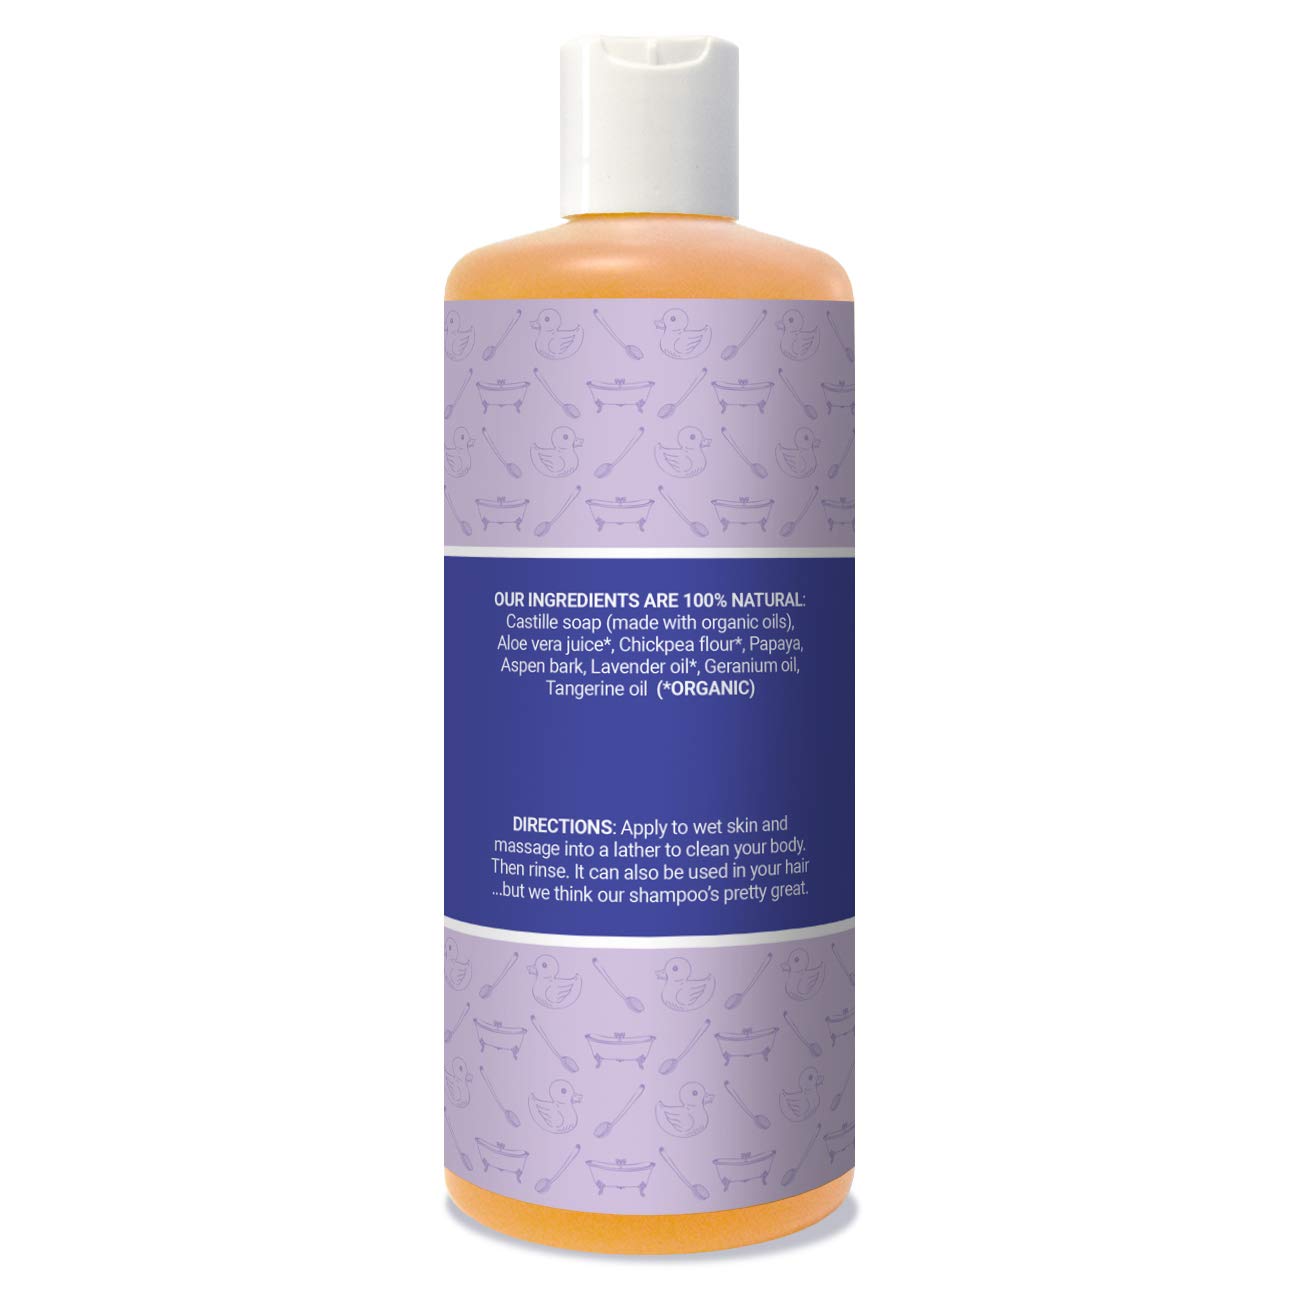 Jivi Exfoliating Body Wash (Lavender) | Gentle, Sulfate-Free Body Wash for Daily Use | 100% Natural with Organic Ingredients | Made for All Skin Types | 14 fl. oz.